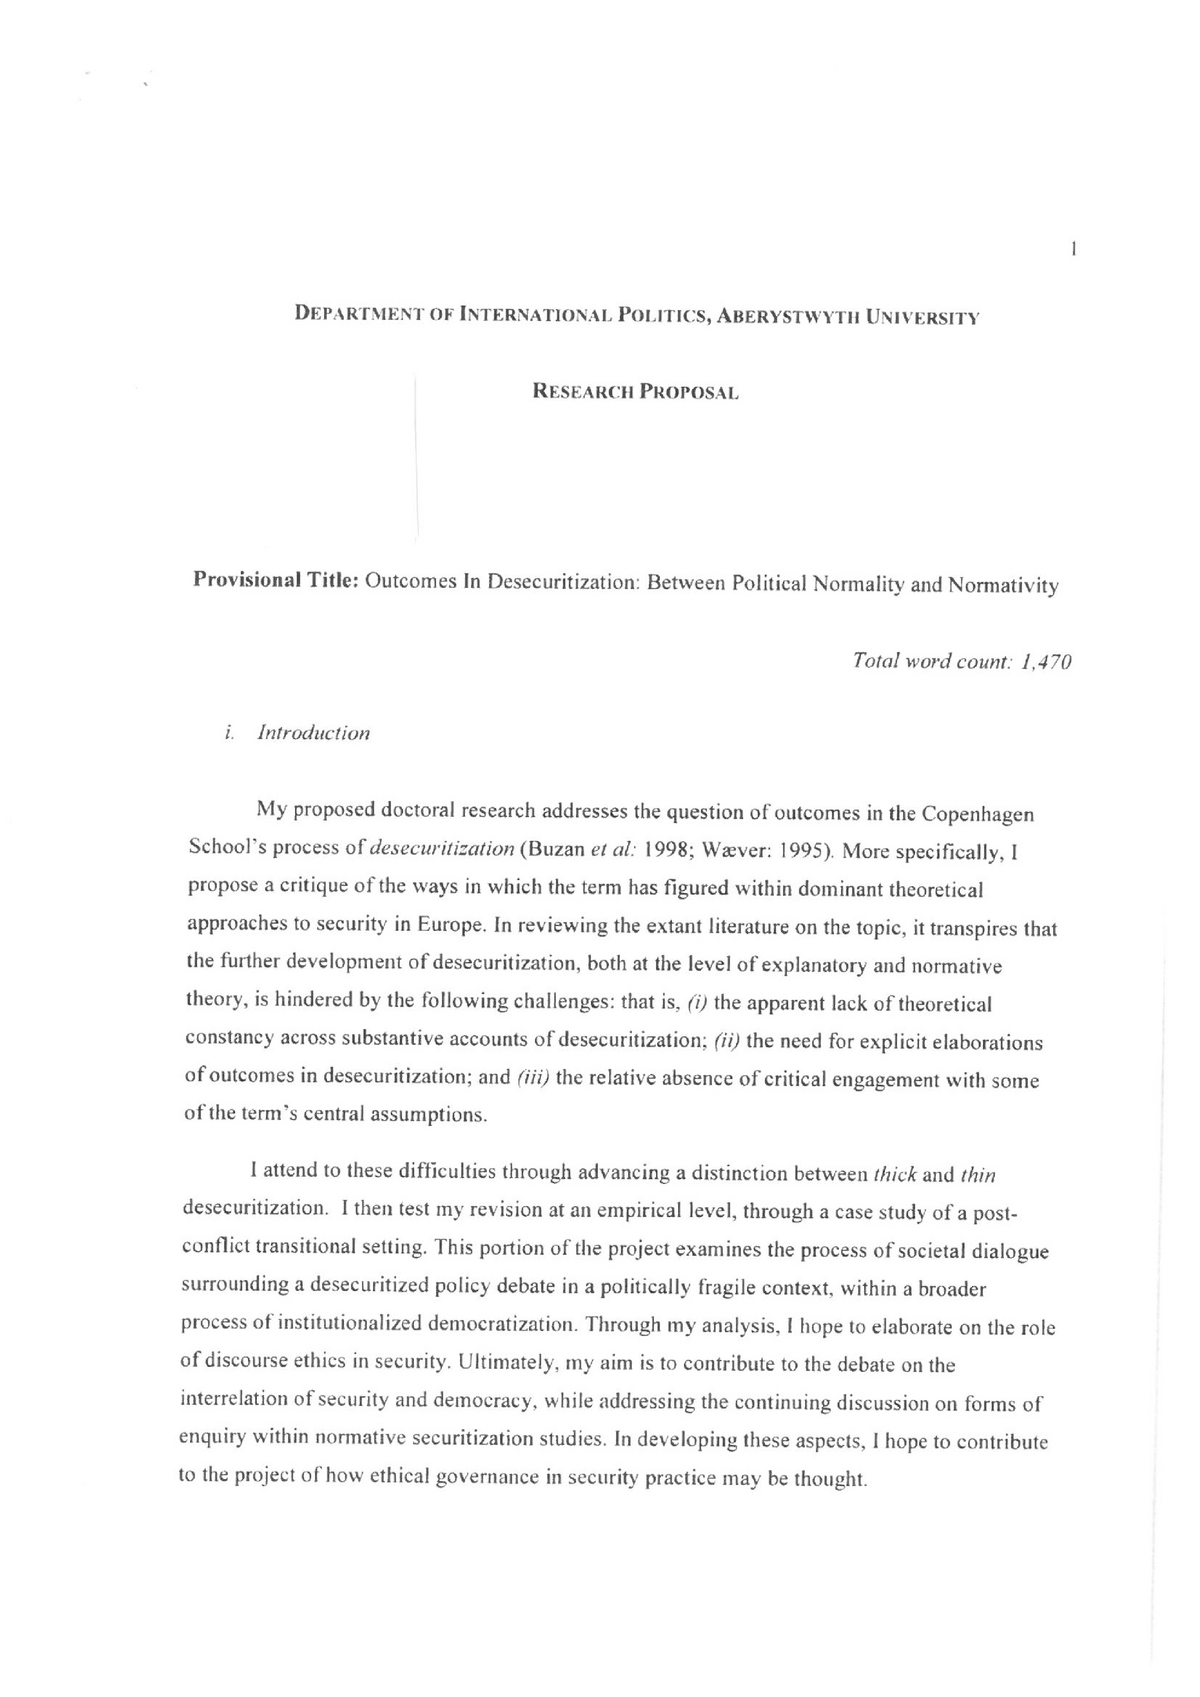 sample of phd research proposal in international relations